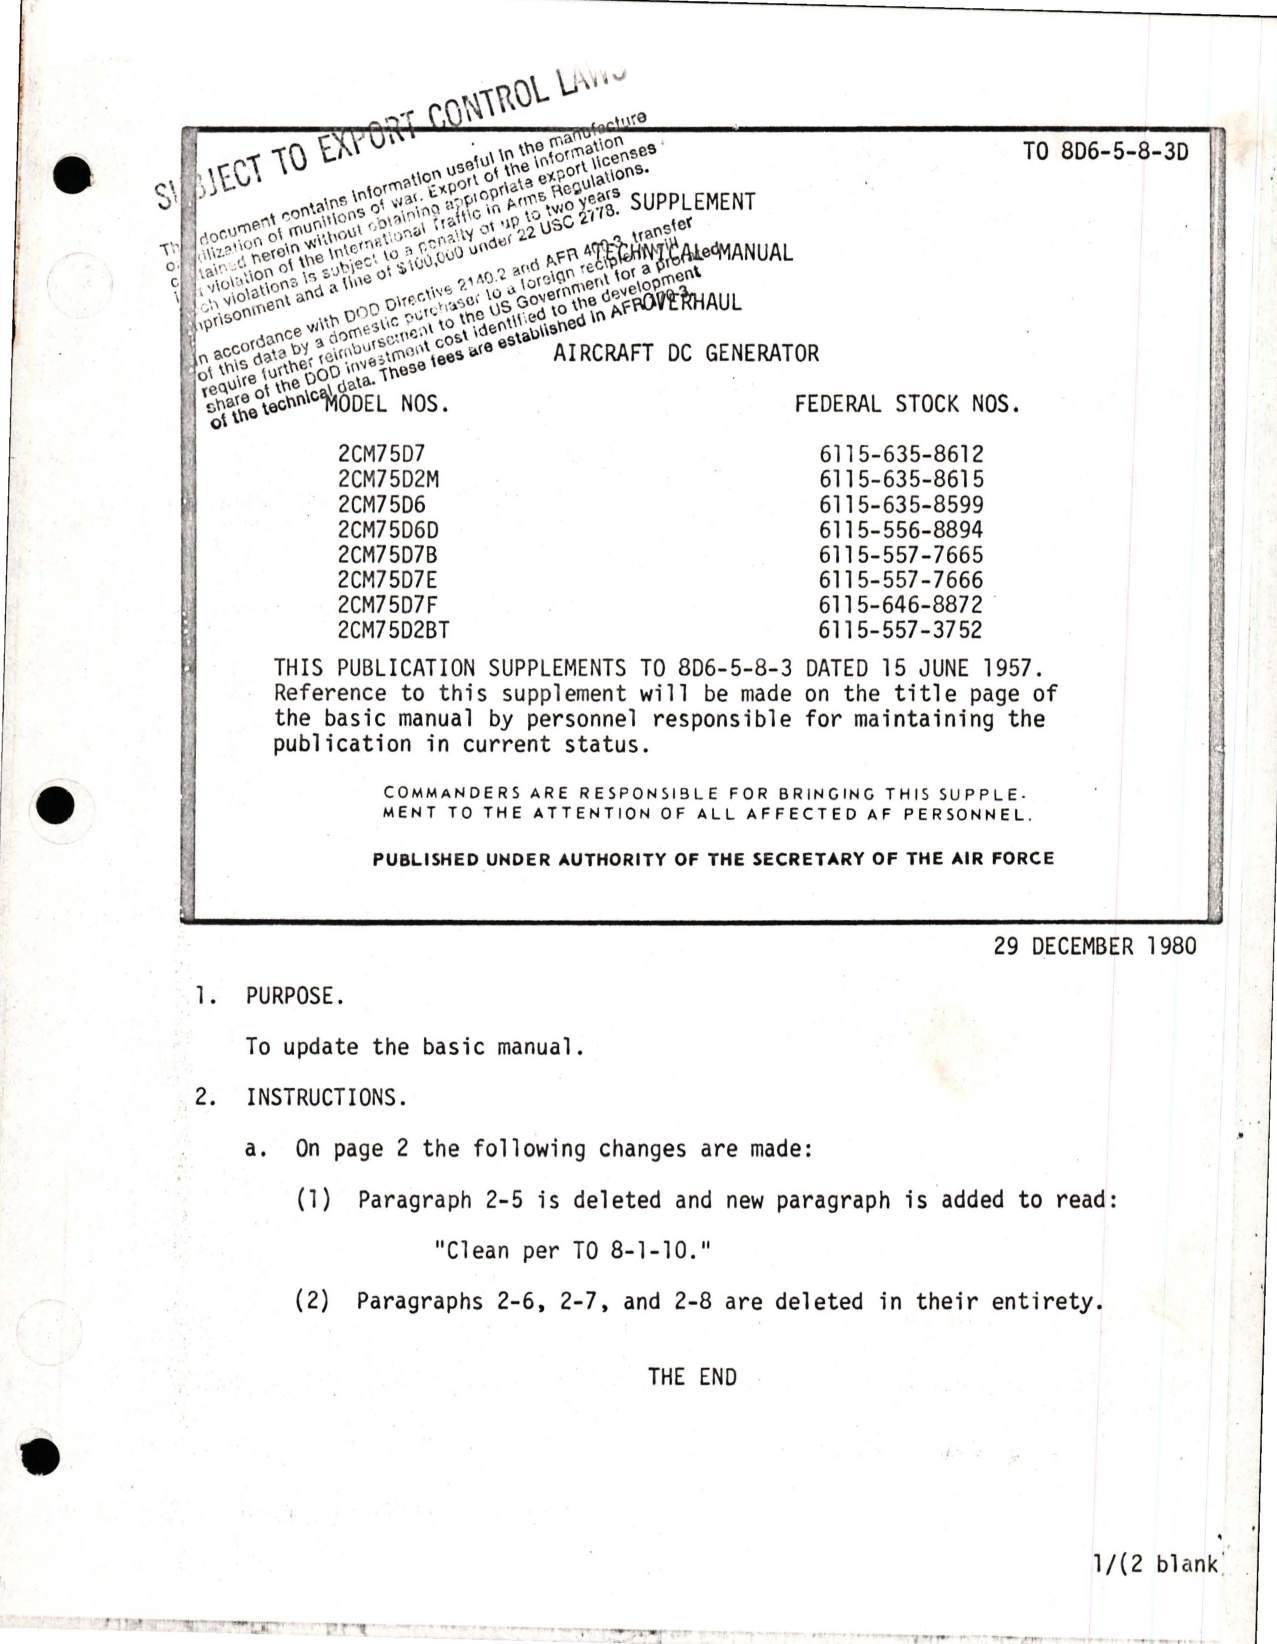 Sample page 1 from AirCorps Library document: Supplement to Overhaul for DC Generator